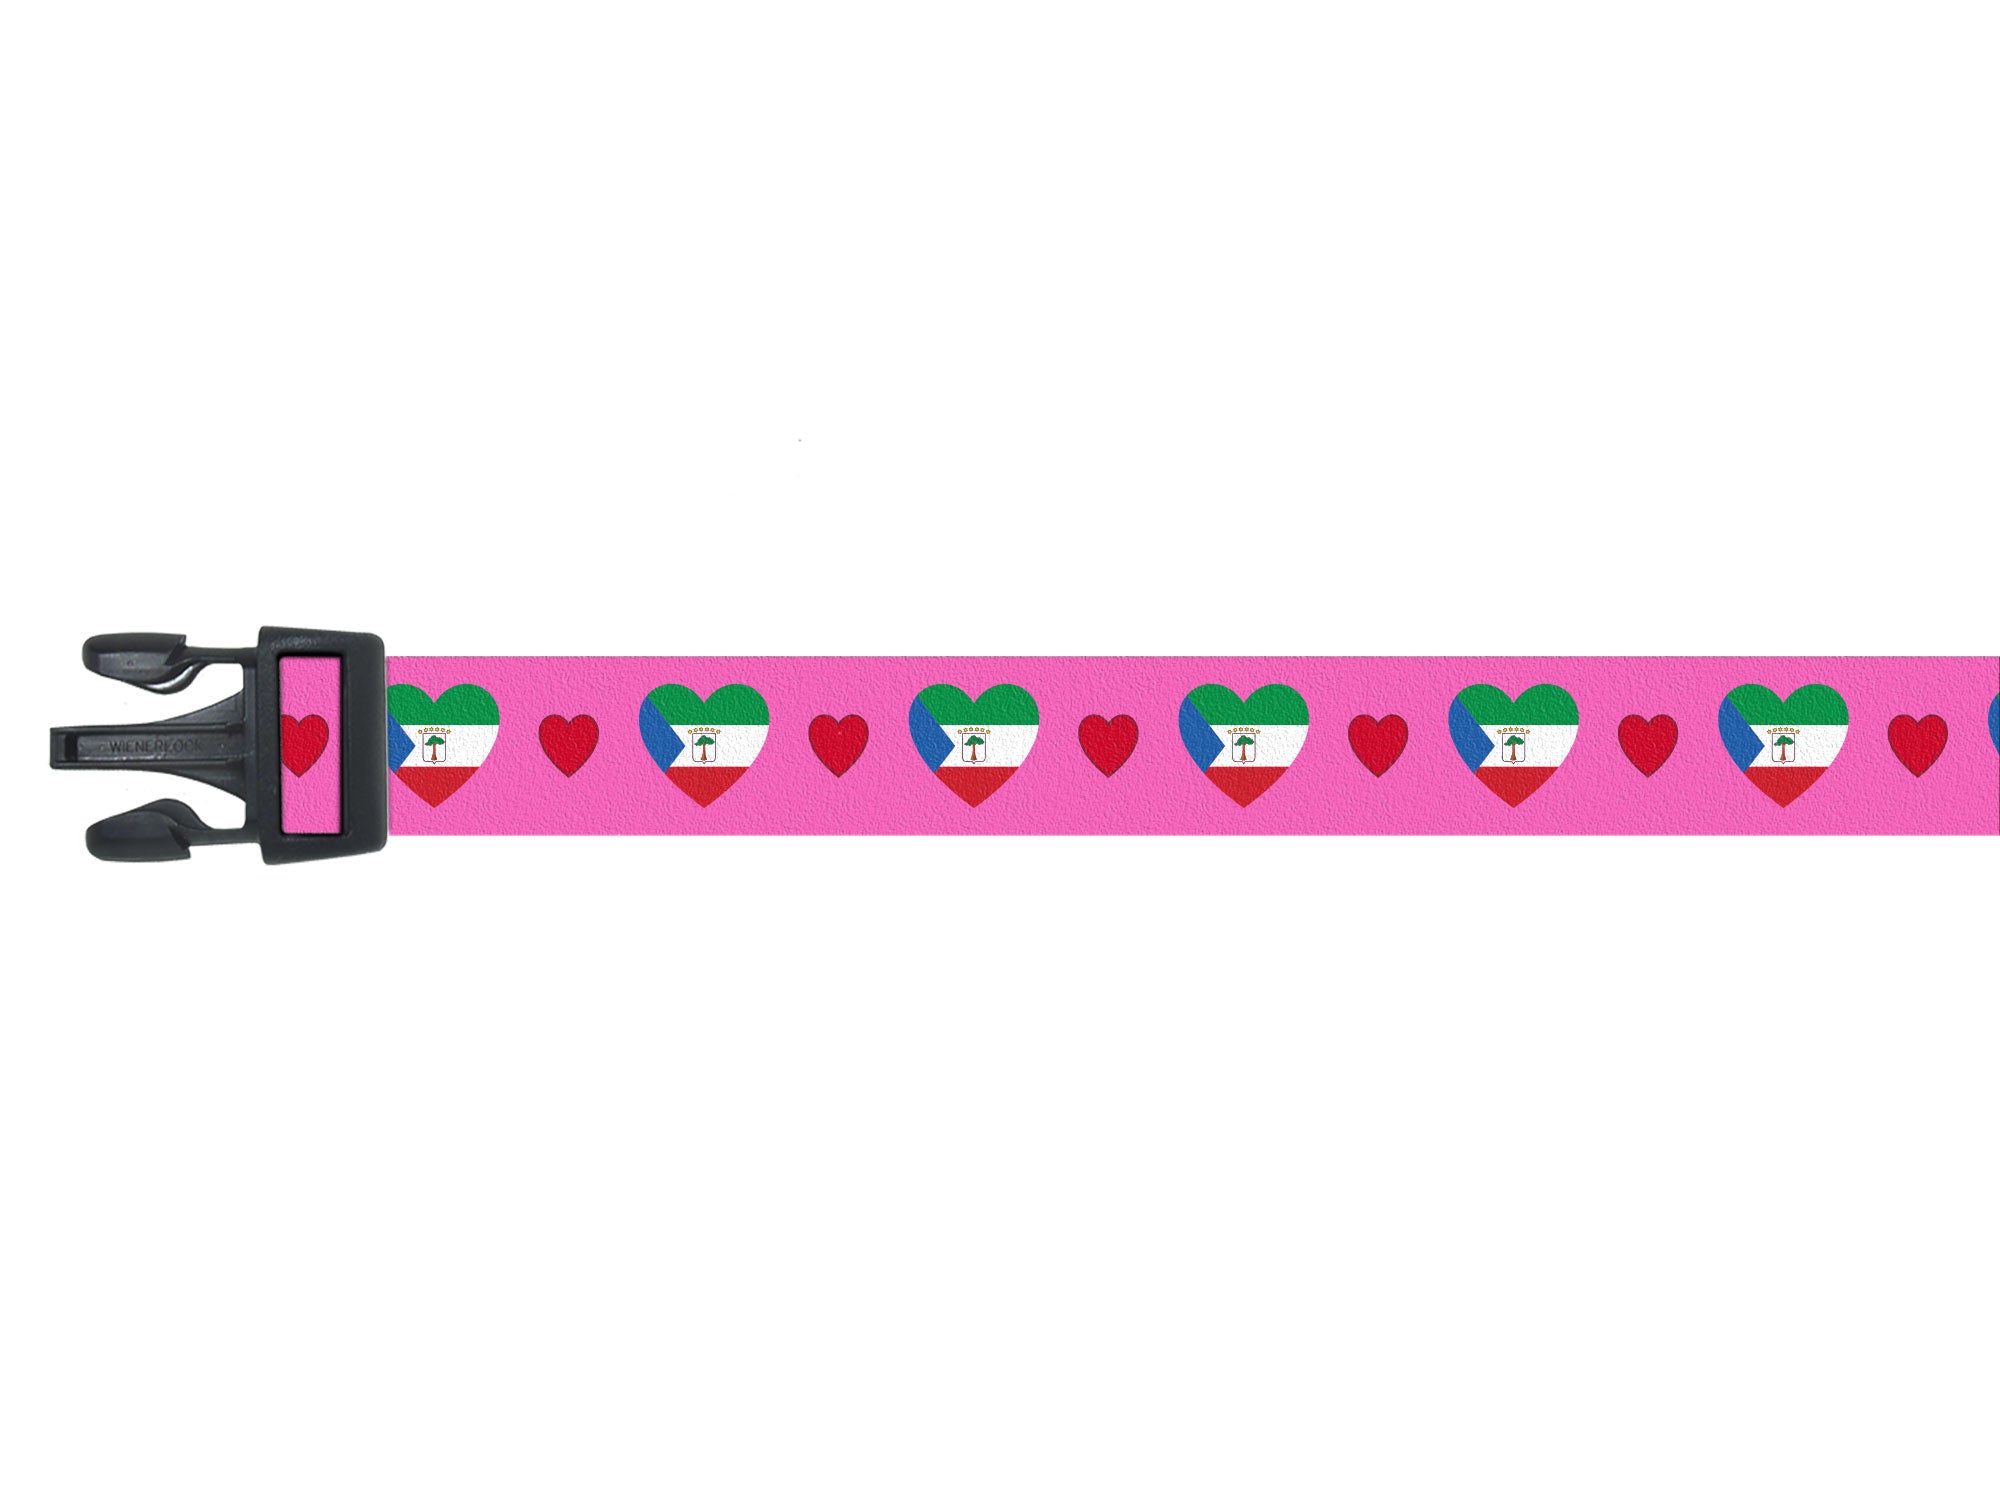 Dog Collar with Equatorial Guinea Hearts Pattern in pink